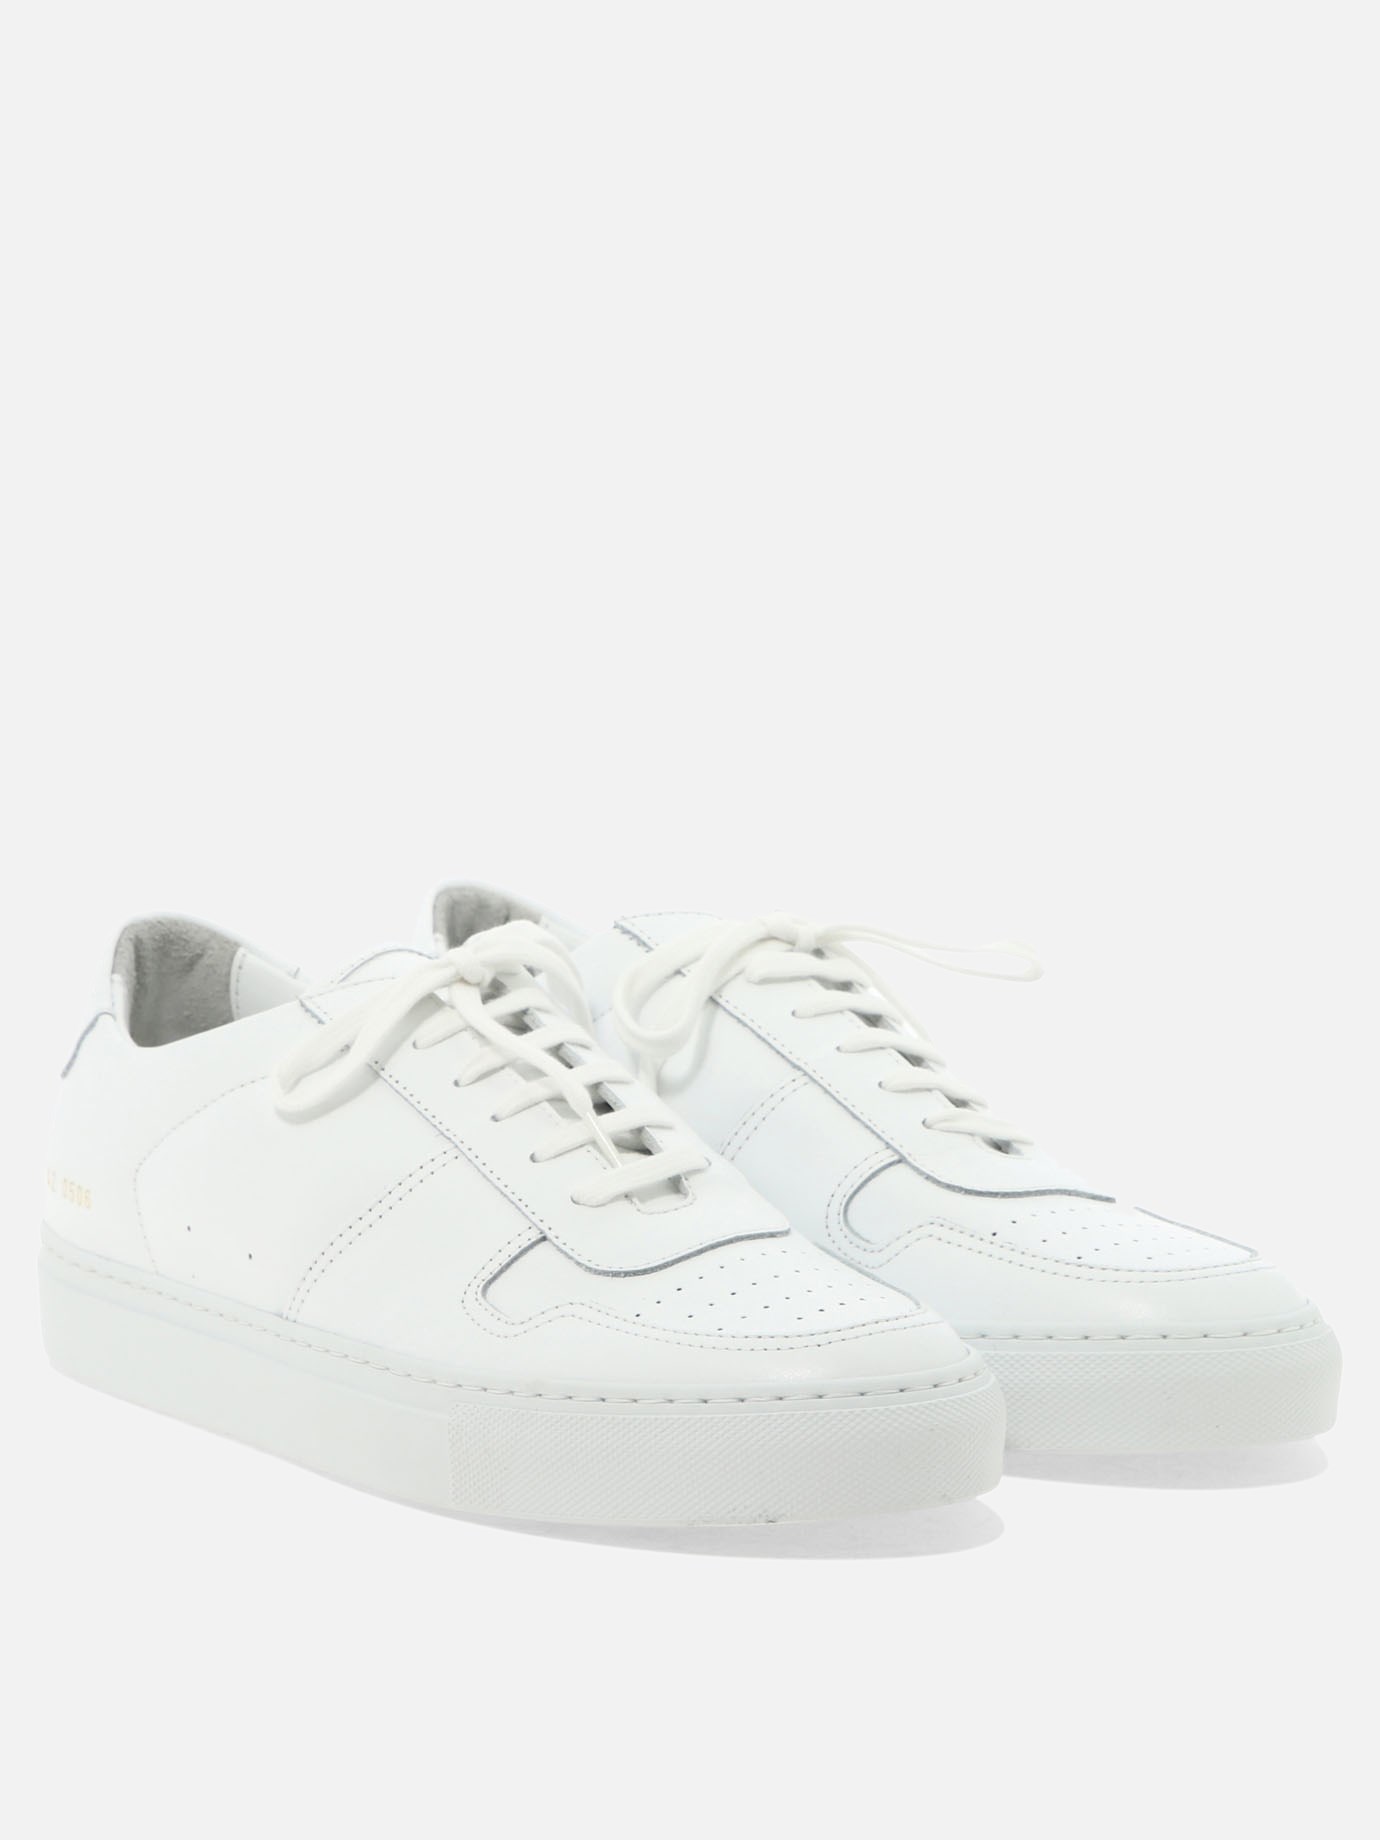 Sneaker  BBall  by Common Projects